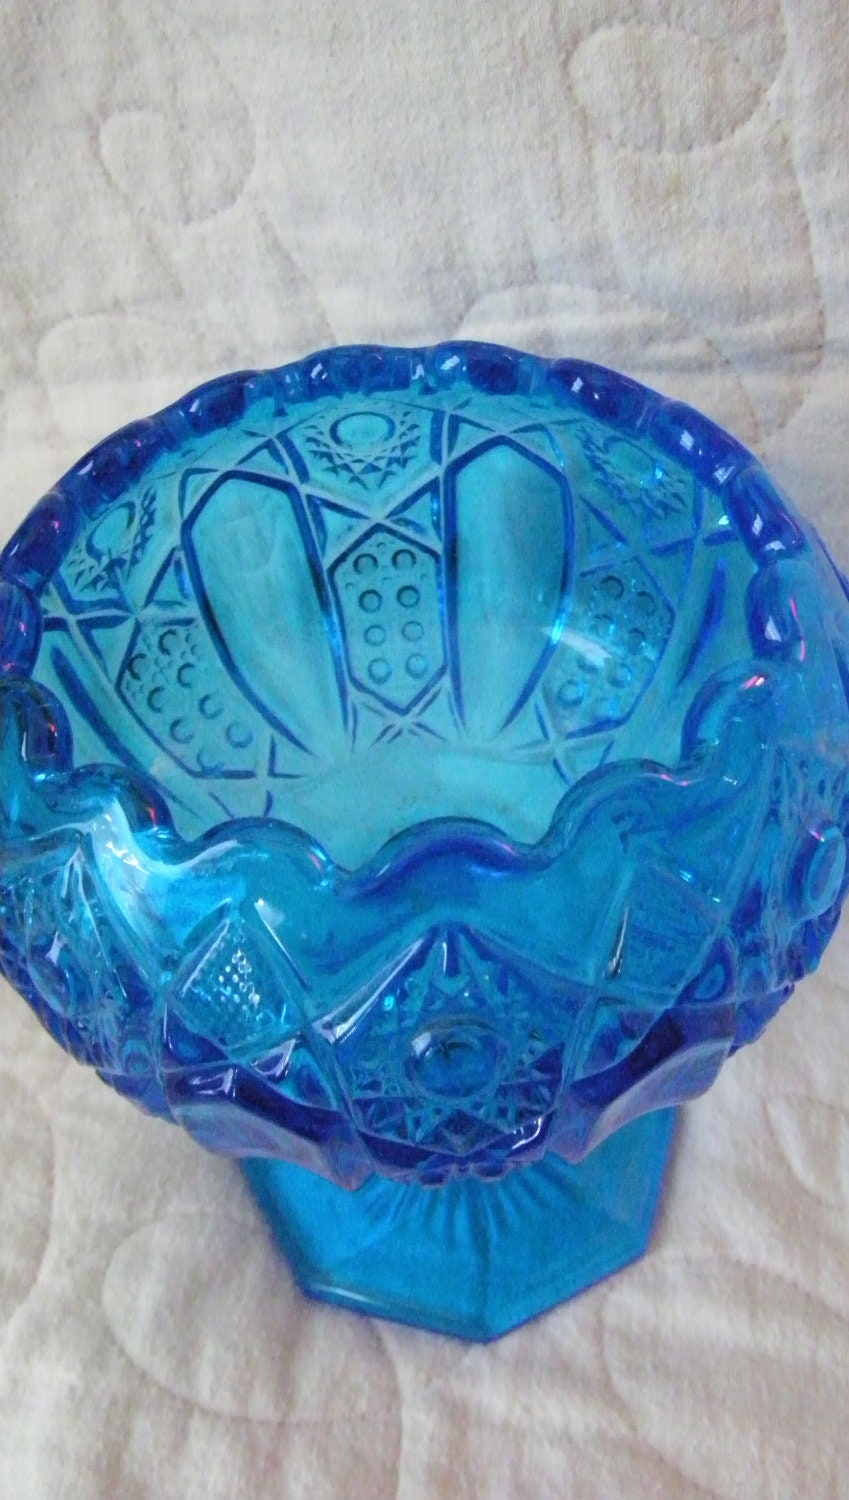 Vintage Blue Glass Compote Bowl Antique Compote Candy Dish Etsy